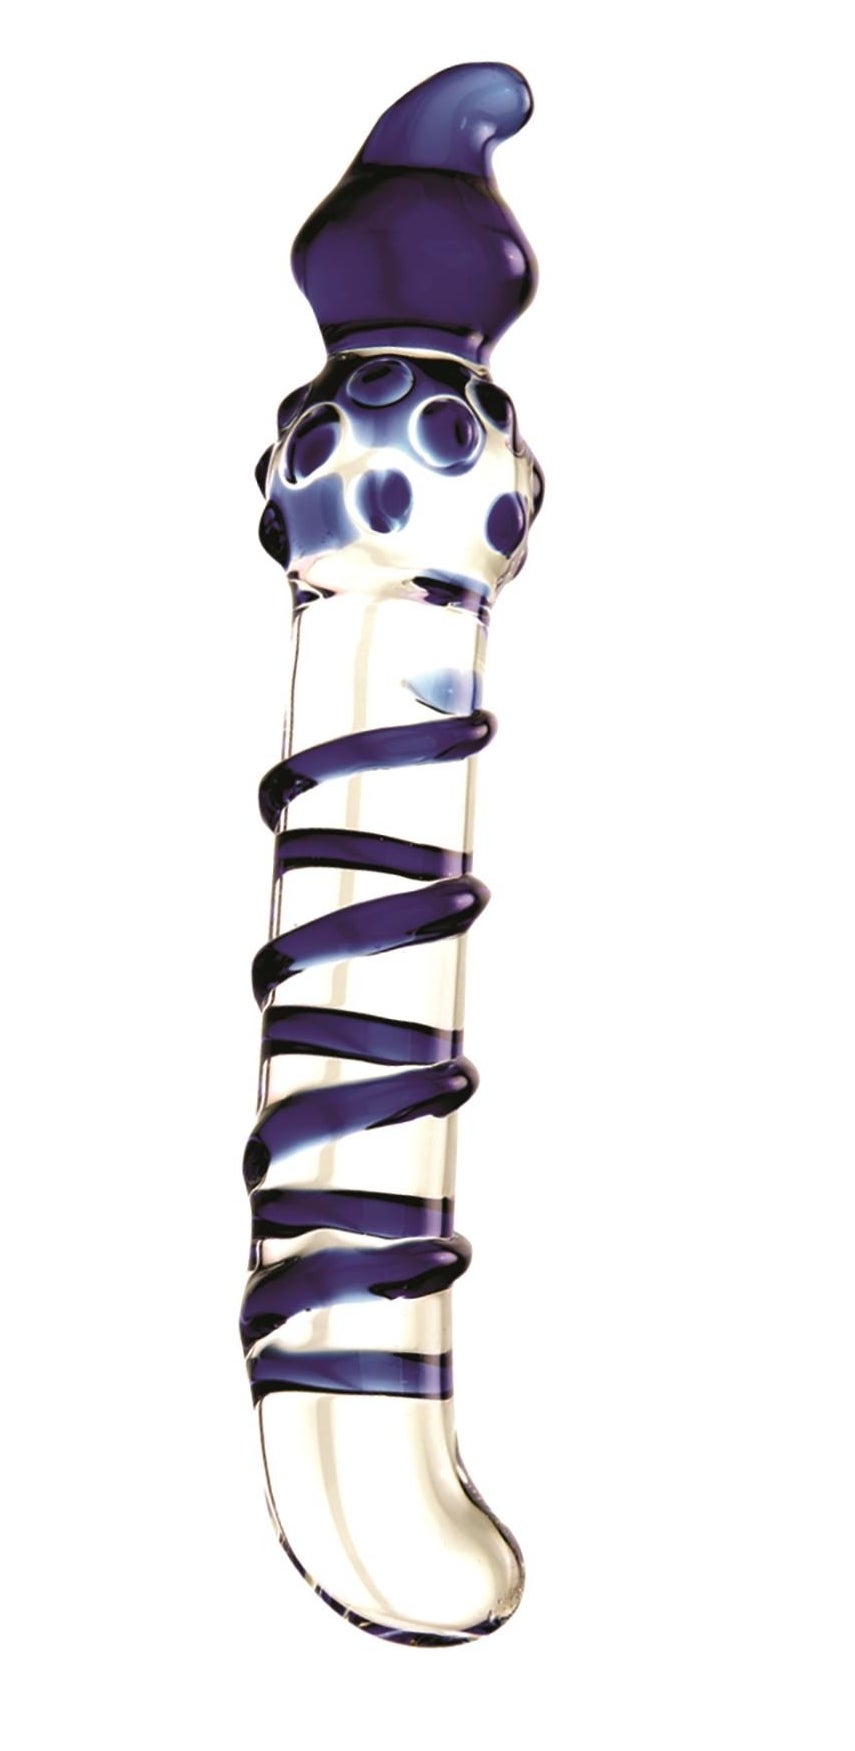 Blue and clear spiral dildo